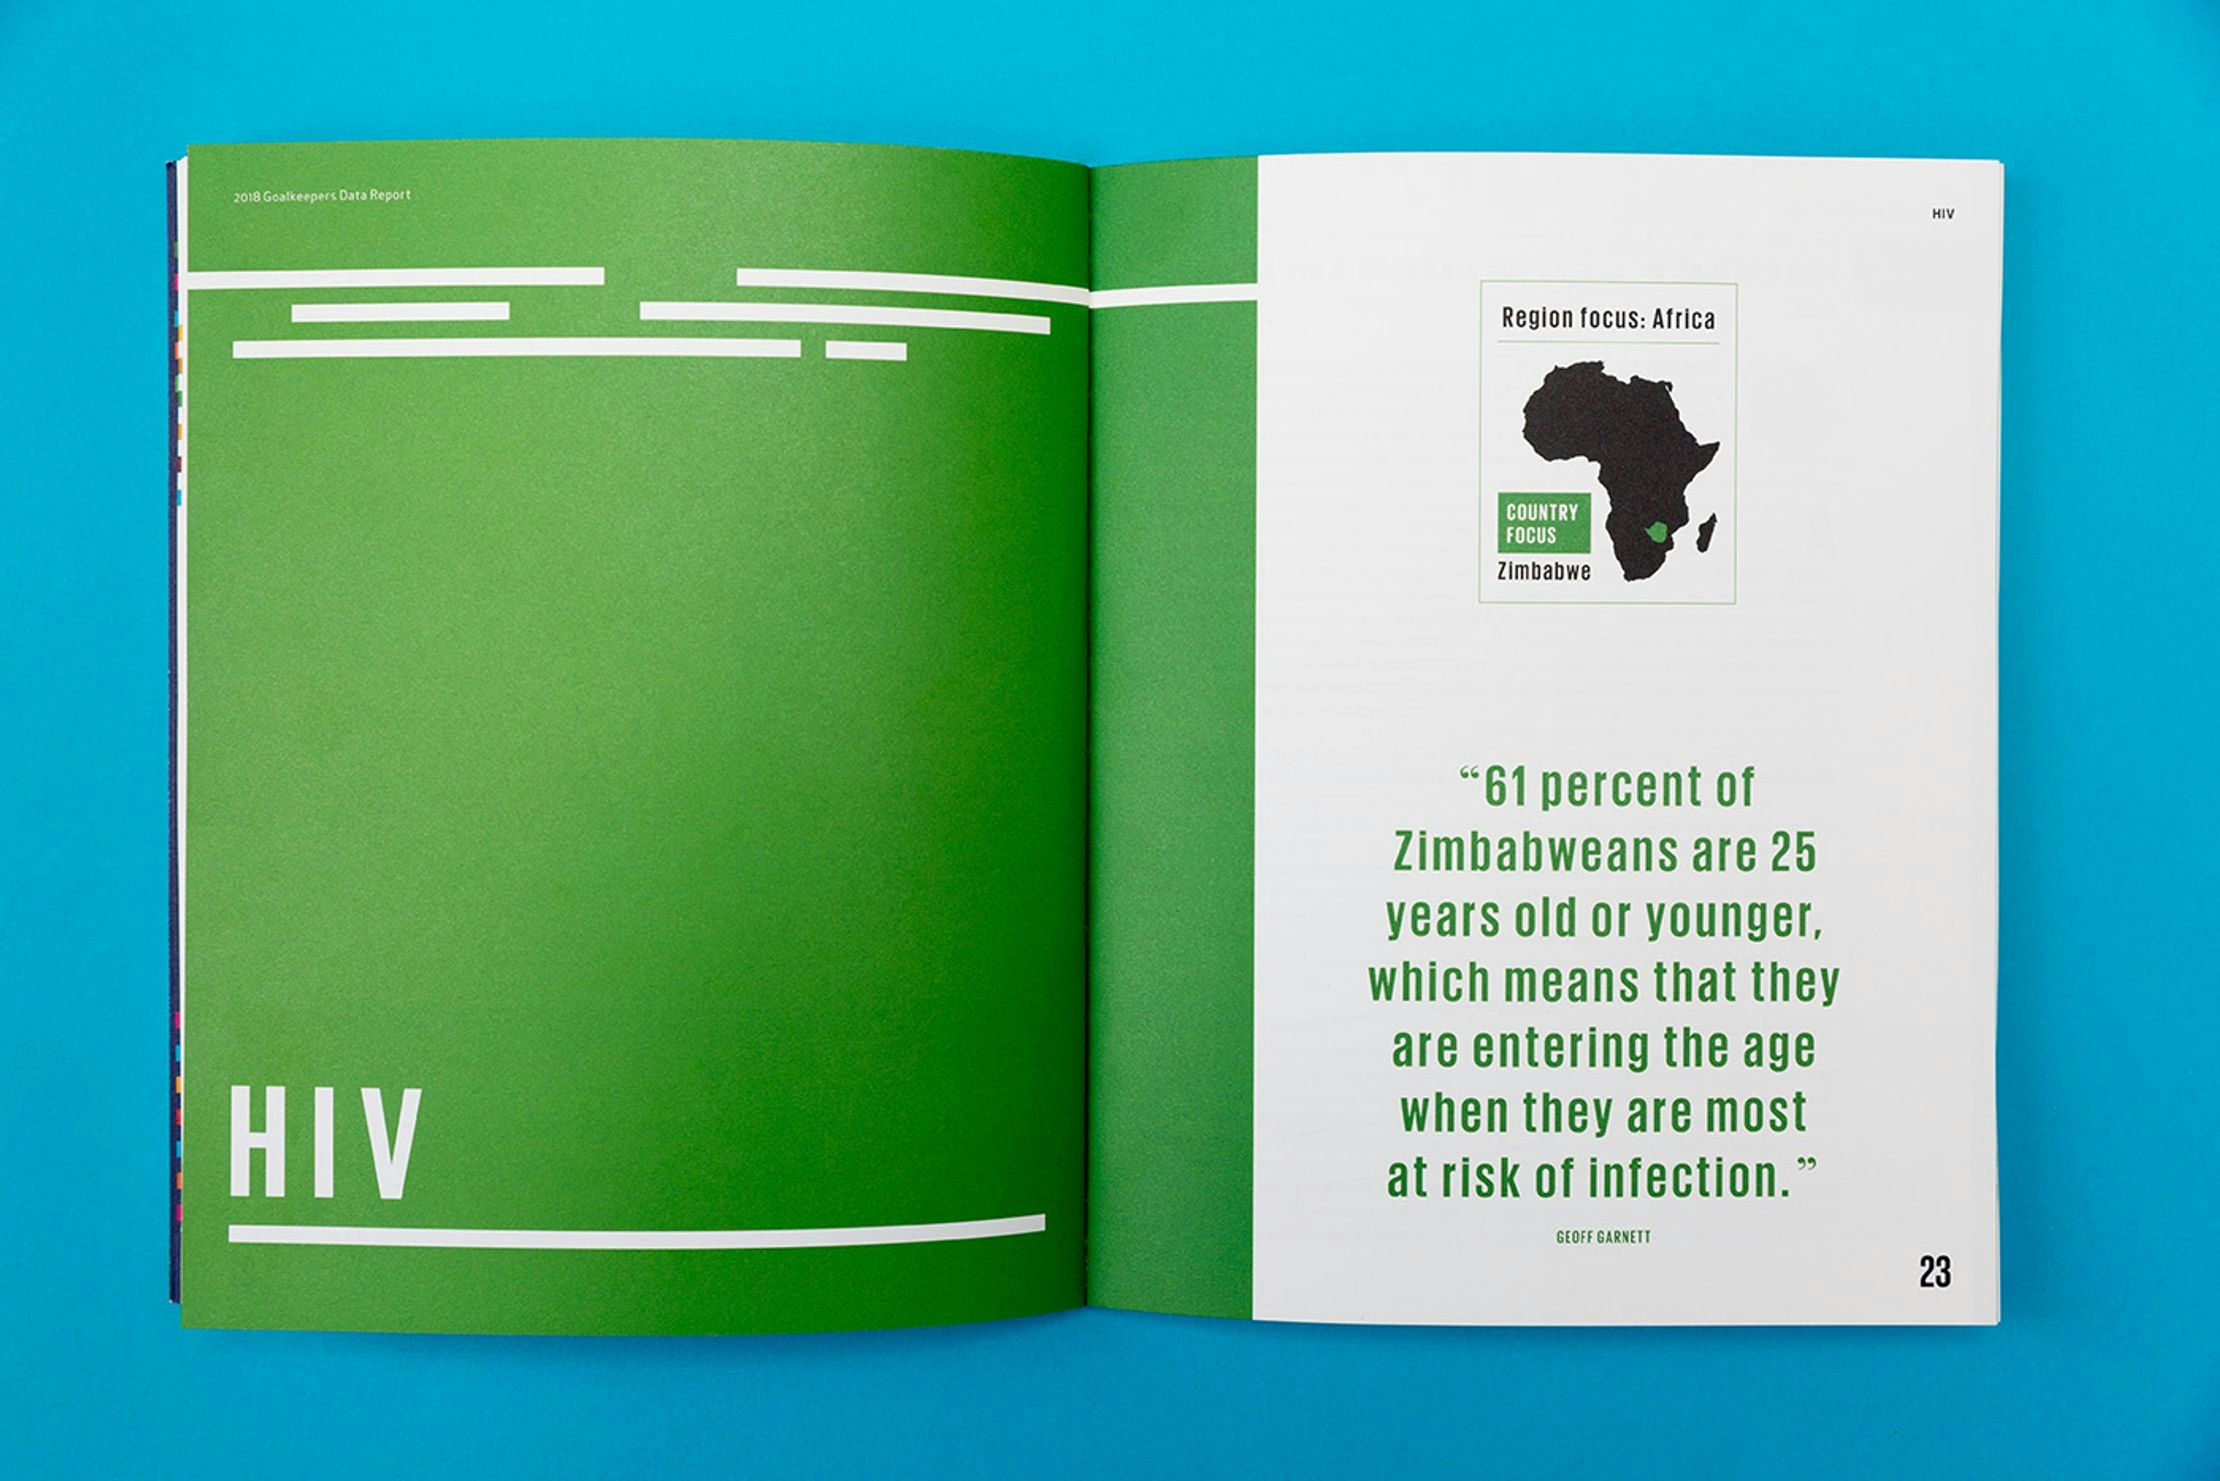 A double page spread of the printed Goalkeepers report. On the left the page is fully green with the large title 'HIV'. On the right hand side is a map of Africa with Zimbabwe in the same green. A quote below the map reads '61 percent of Zimbabweans are 25 years old or younger, which means that they are entering the age when they are most at risk of infection'.'